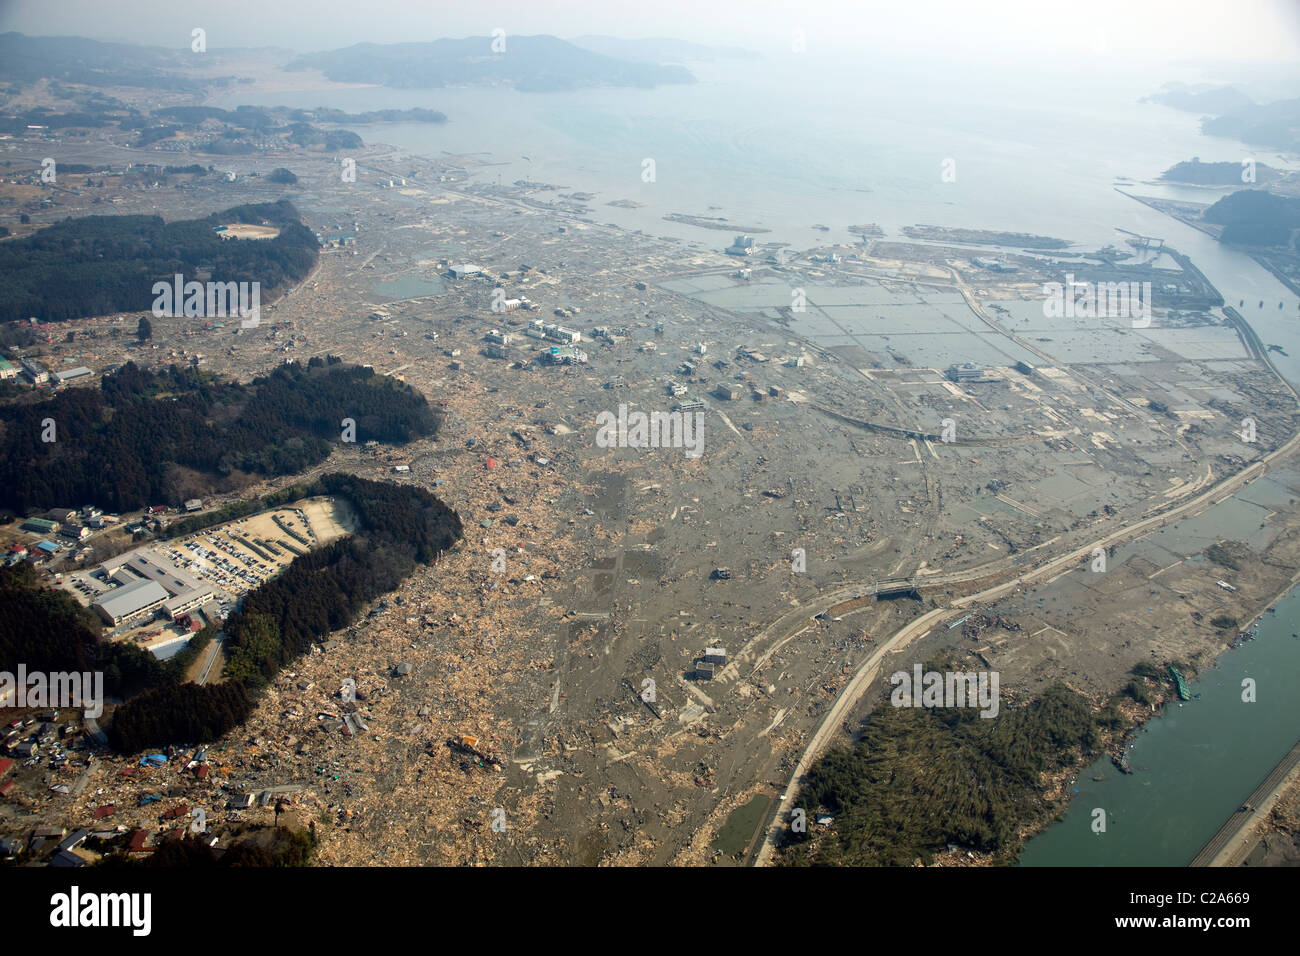 Aerial view of damage to Rikuzentakata, Iwate Prefecture after a 9. 0 magnitude earthquake and subsequent tsunami devastated Stock Photo